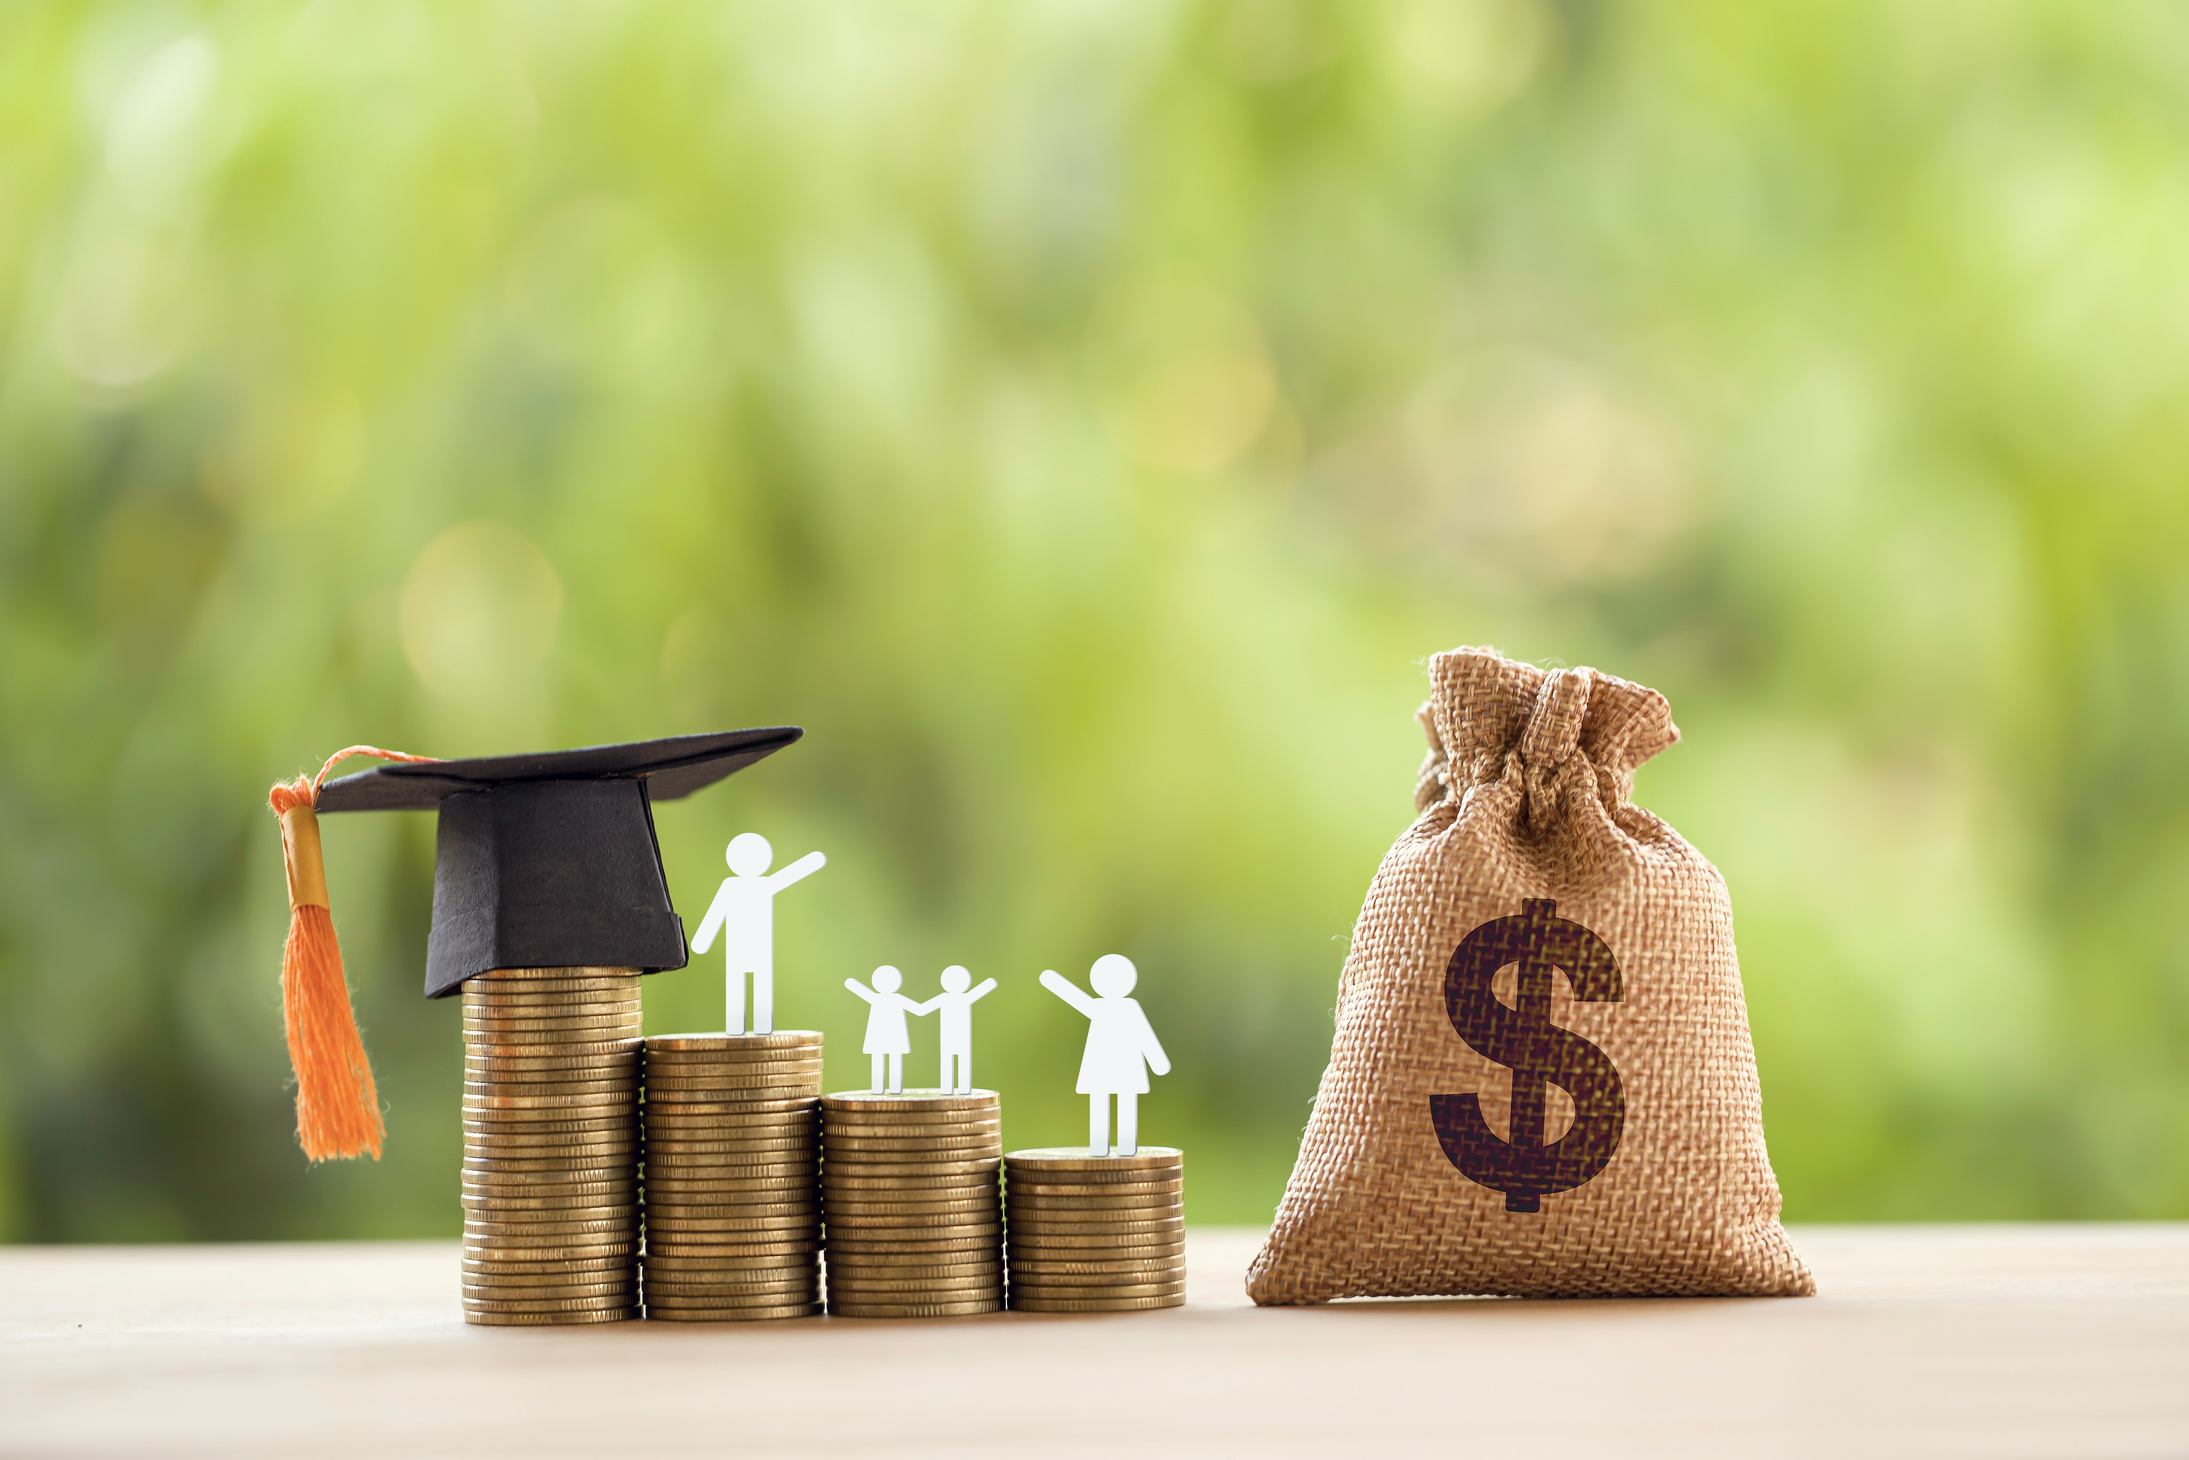 Black graduation cap, hat, student and kid, rows of rising coins, white clock on a table, natural green background. Public school funding, education funding, financial concept